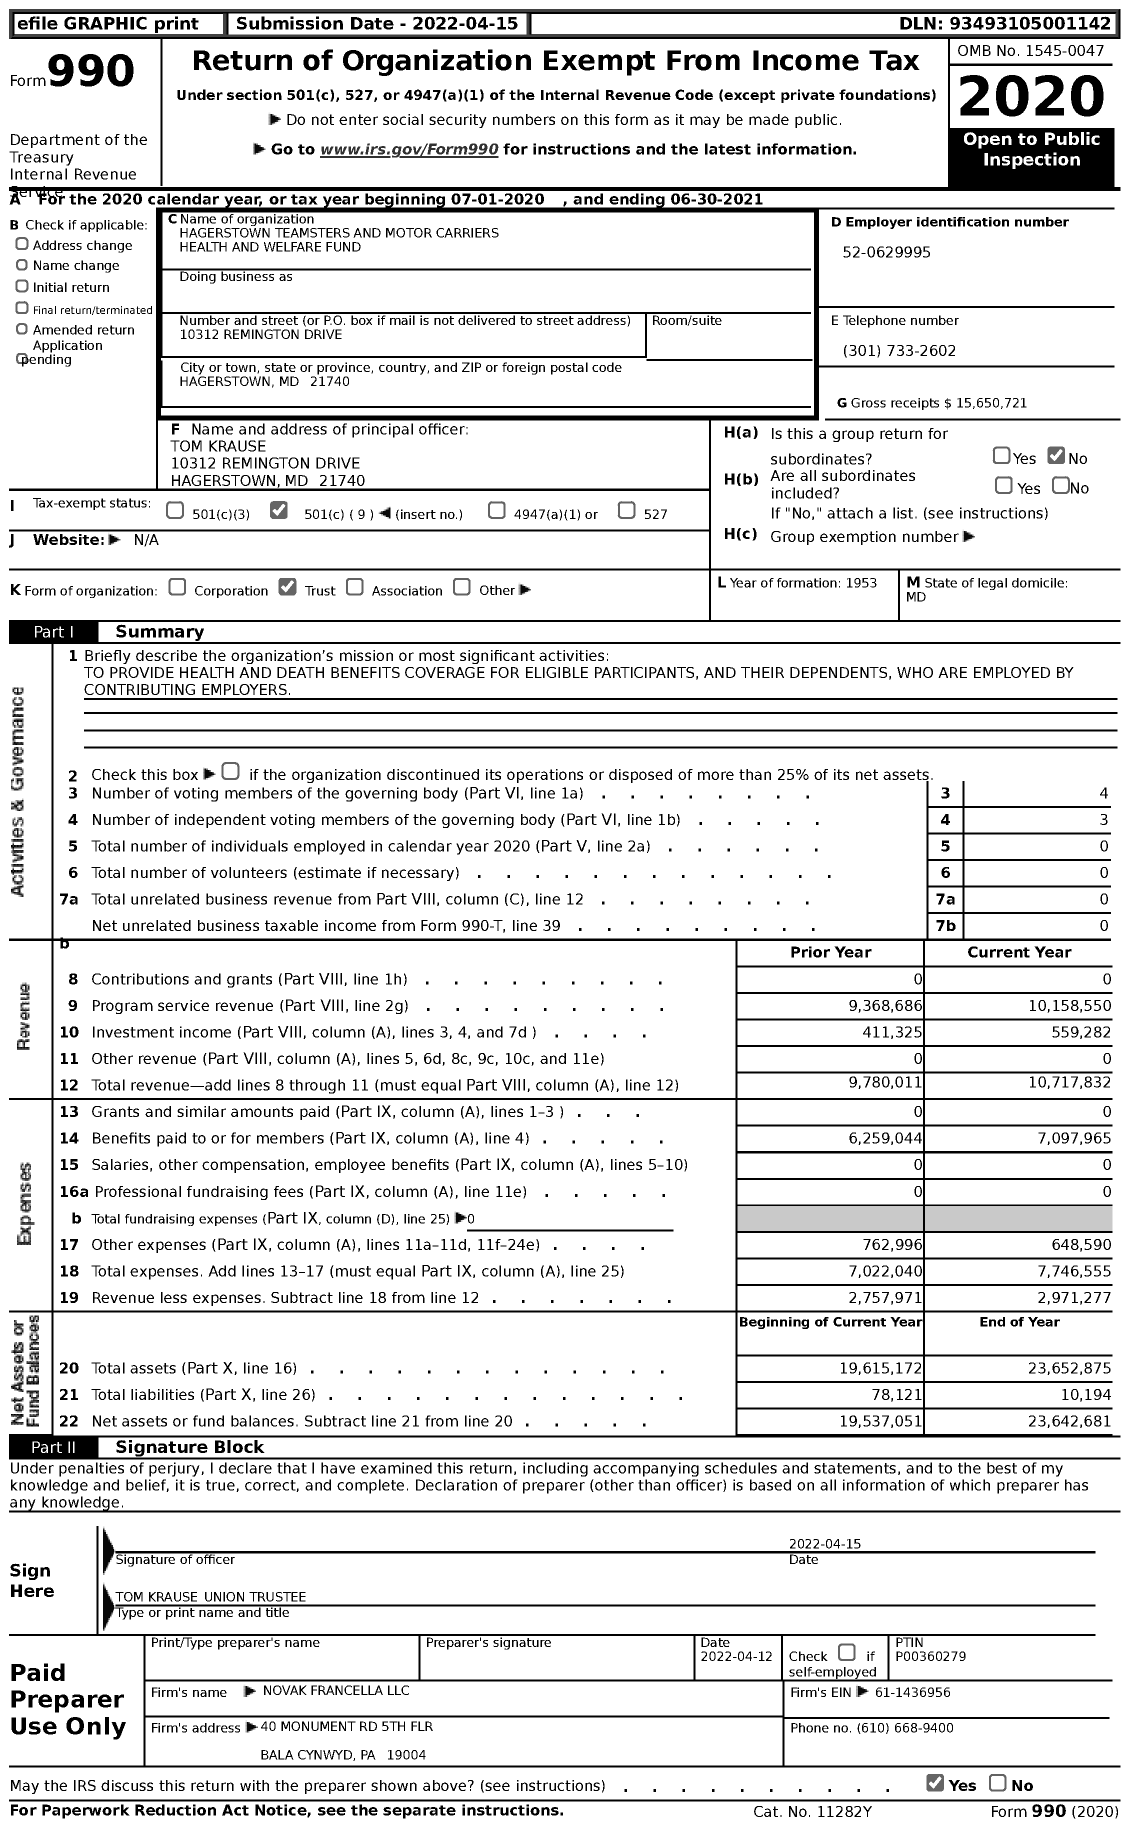 Image of first page of 2020 Form 990 for Hagerstown Teamsters and Motor Carriers Health and Welfare Fund